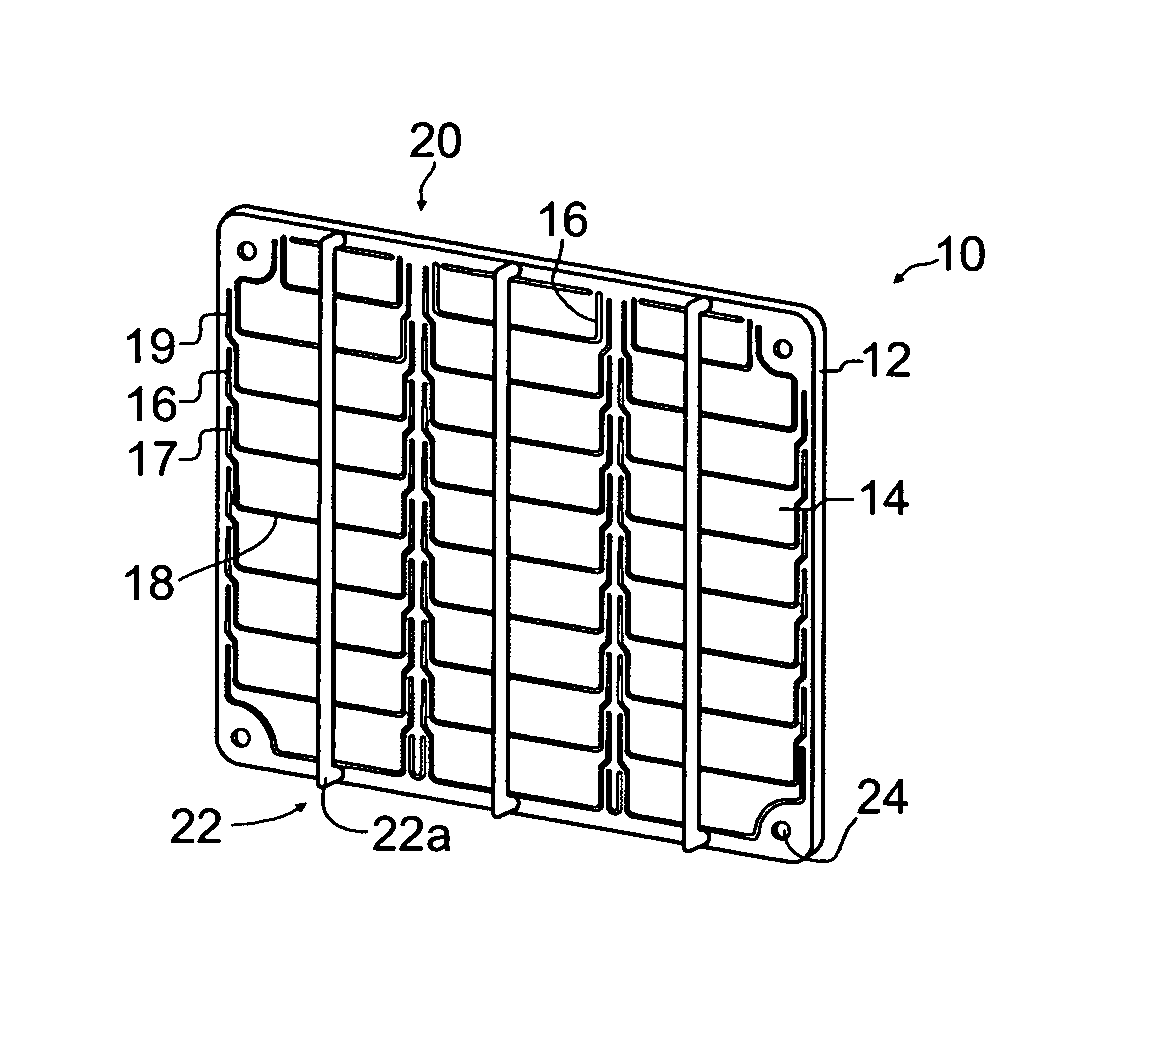 Device for preventing backflow in a cooling system